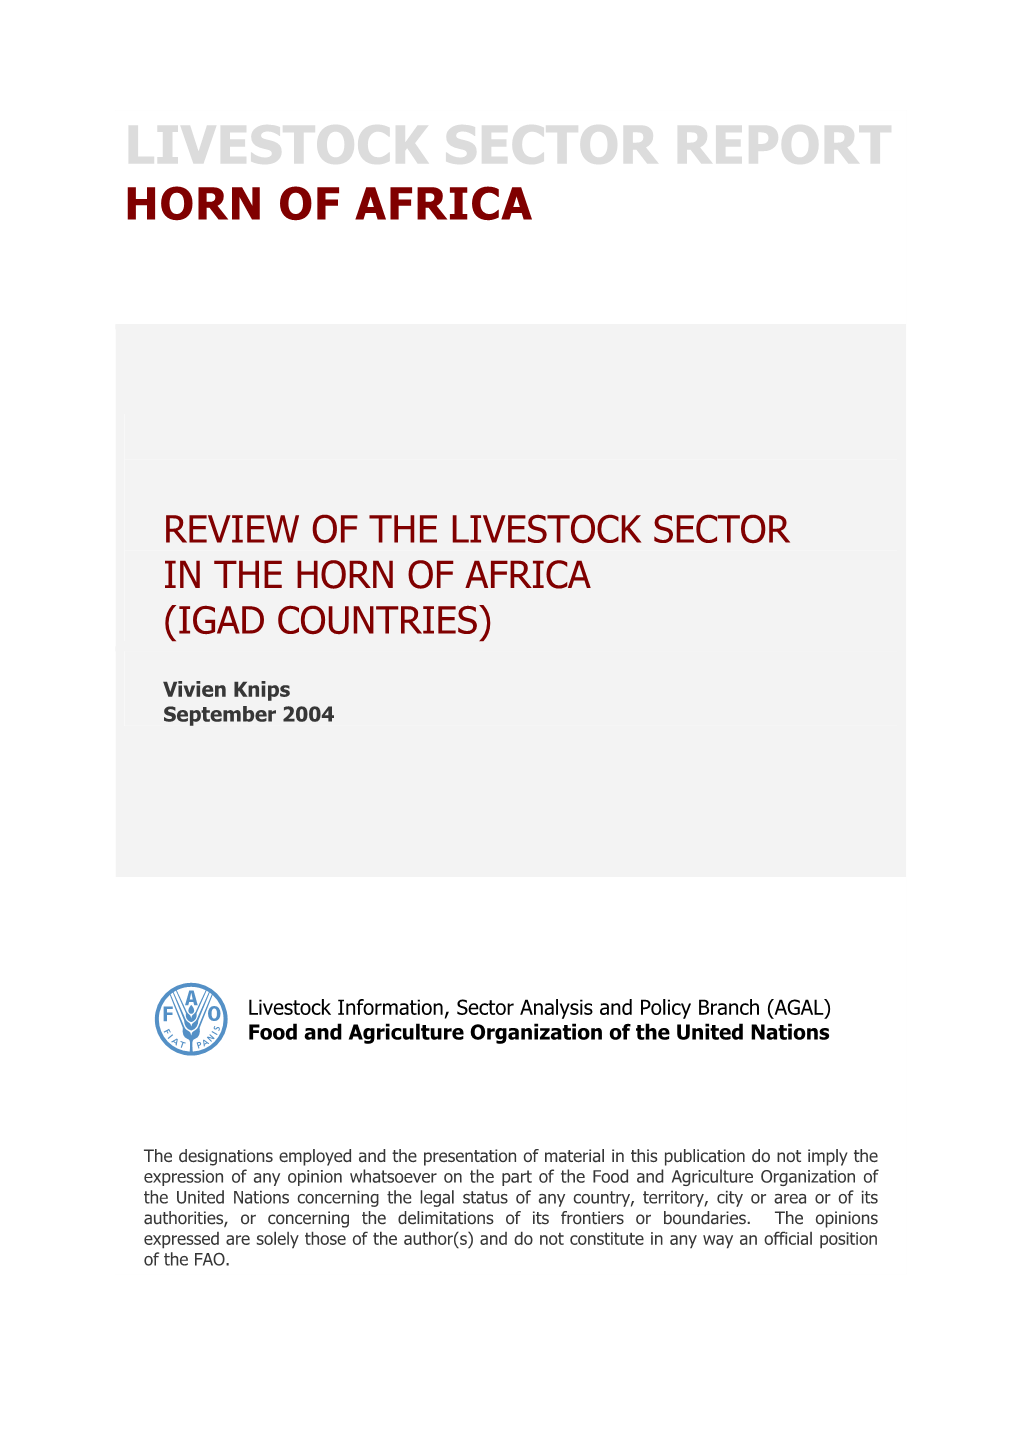 Review of the Livestock Sector in the Horn of Africa (Igad Countries)